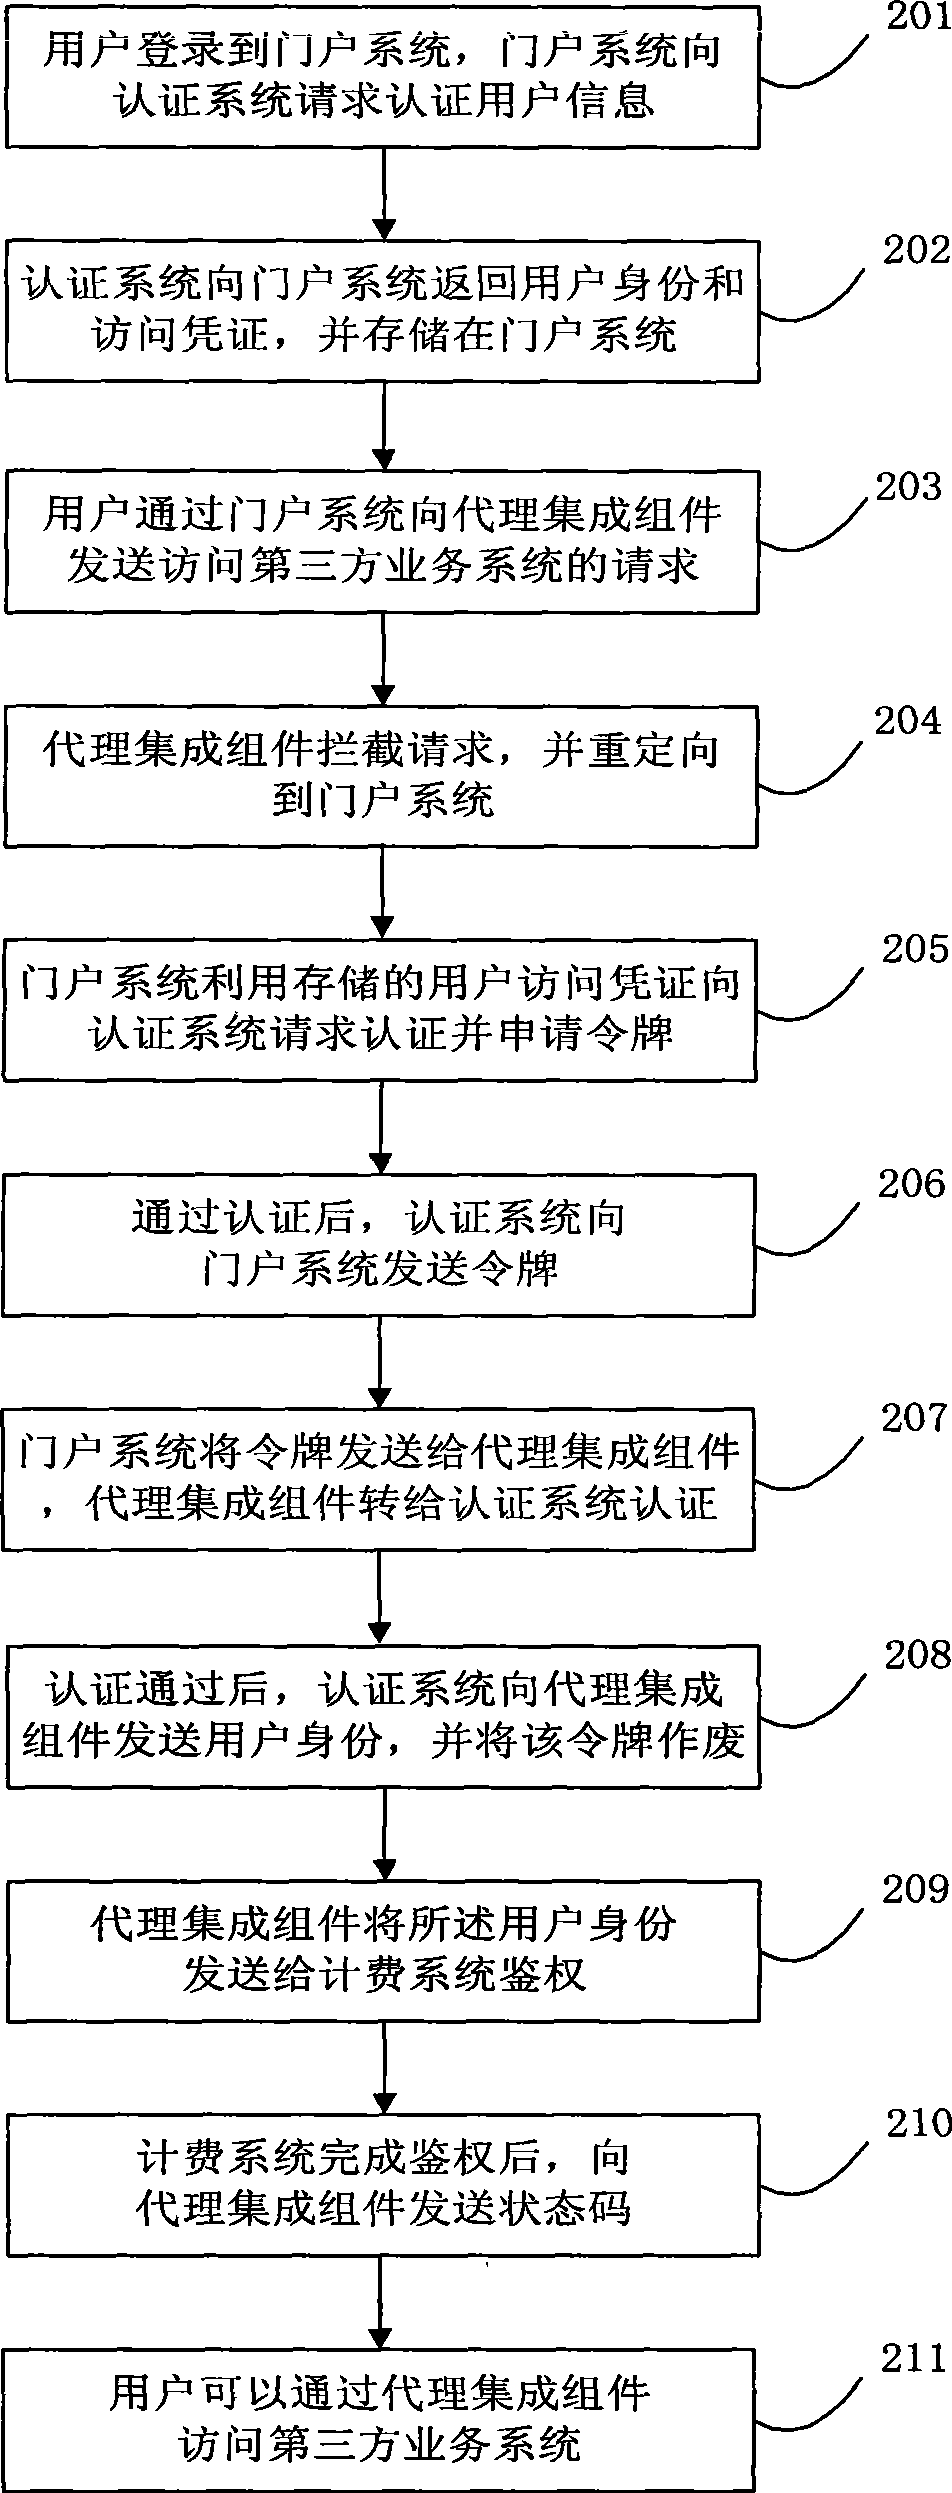 Method and system for implementing authentication